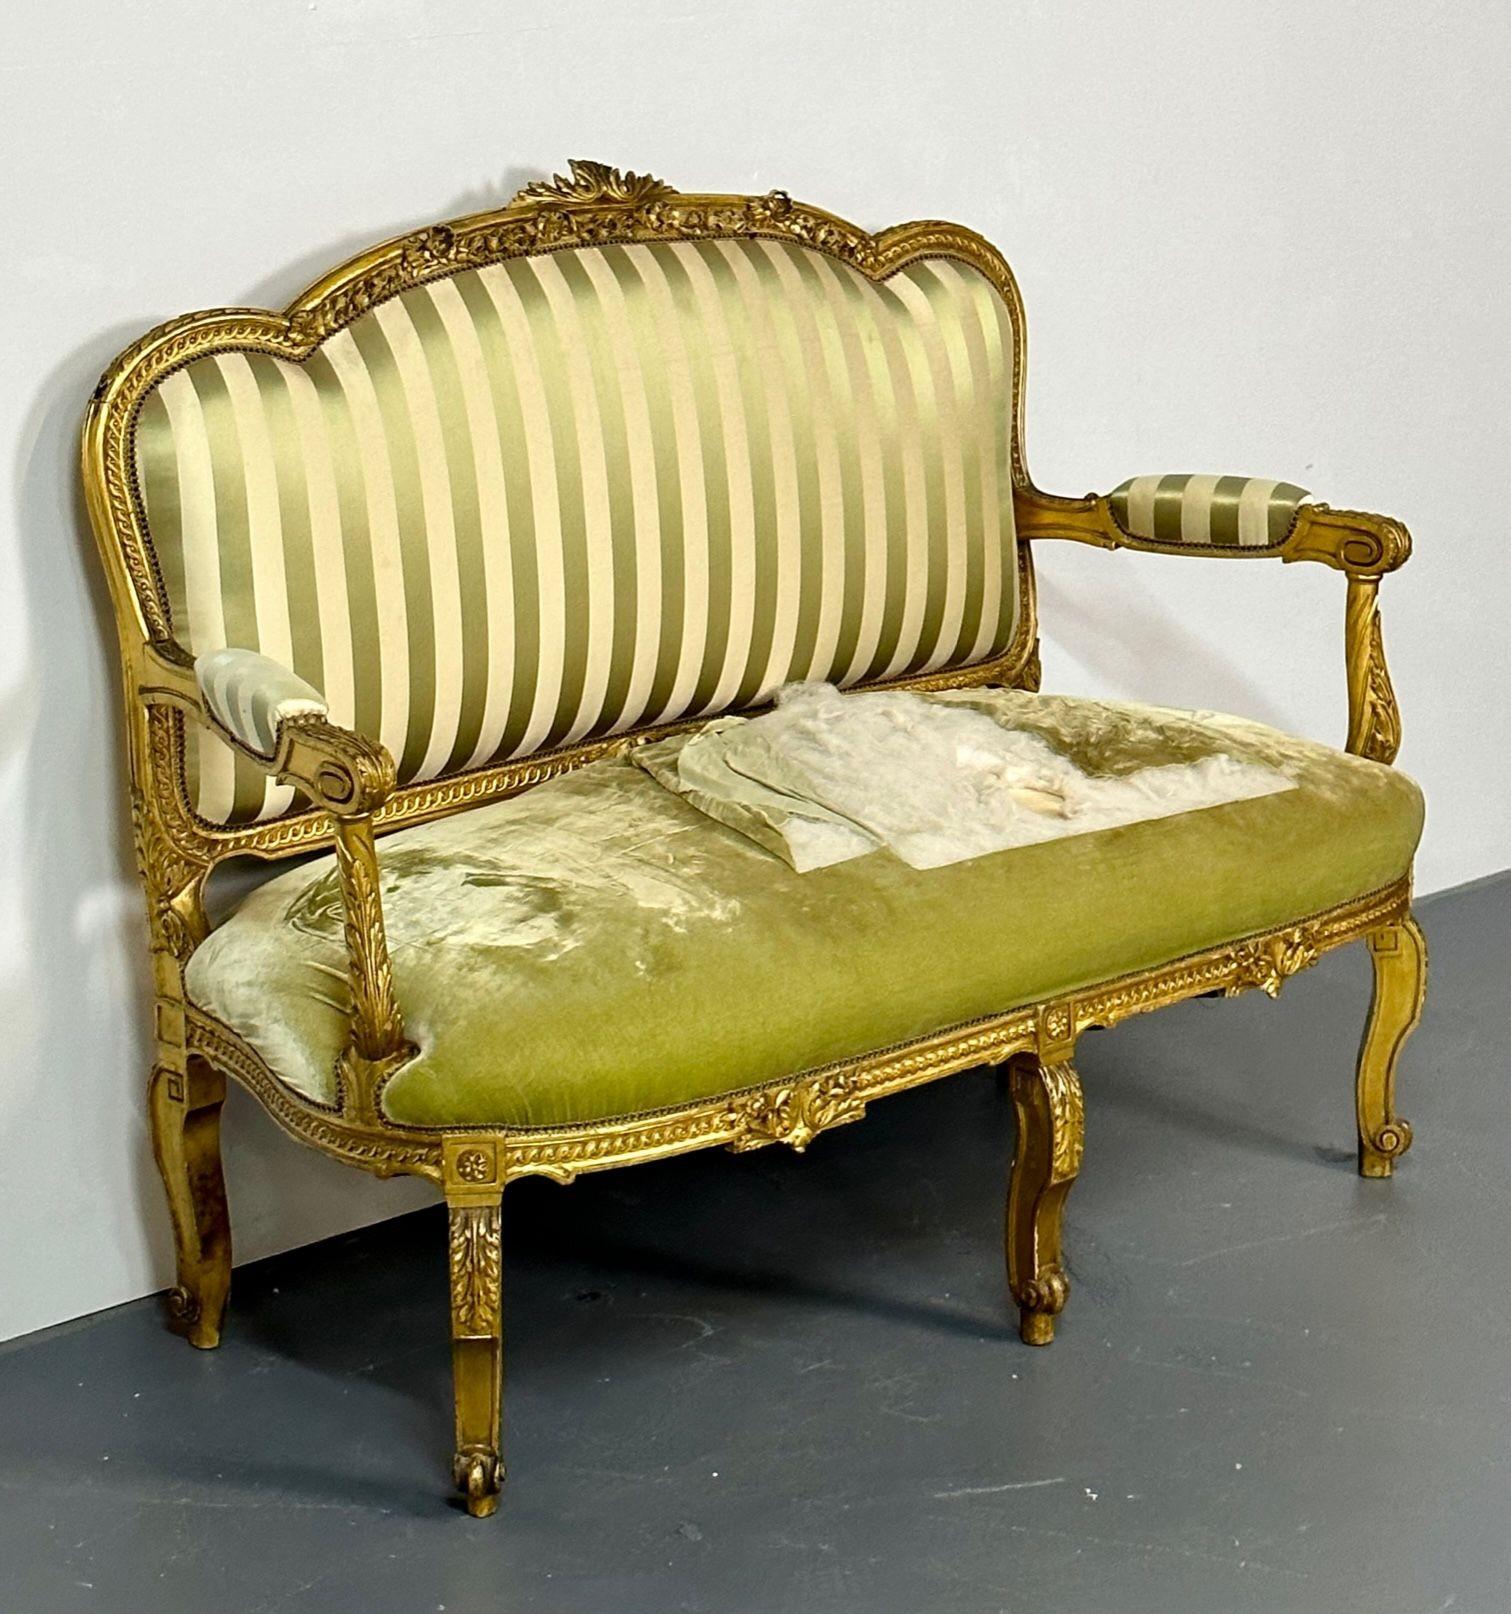 French Giltwood Settee, Canape Louis XV, Durand, 19th Century, Solid Wood